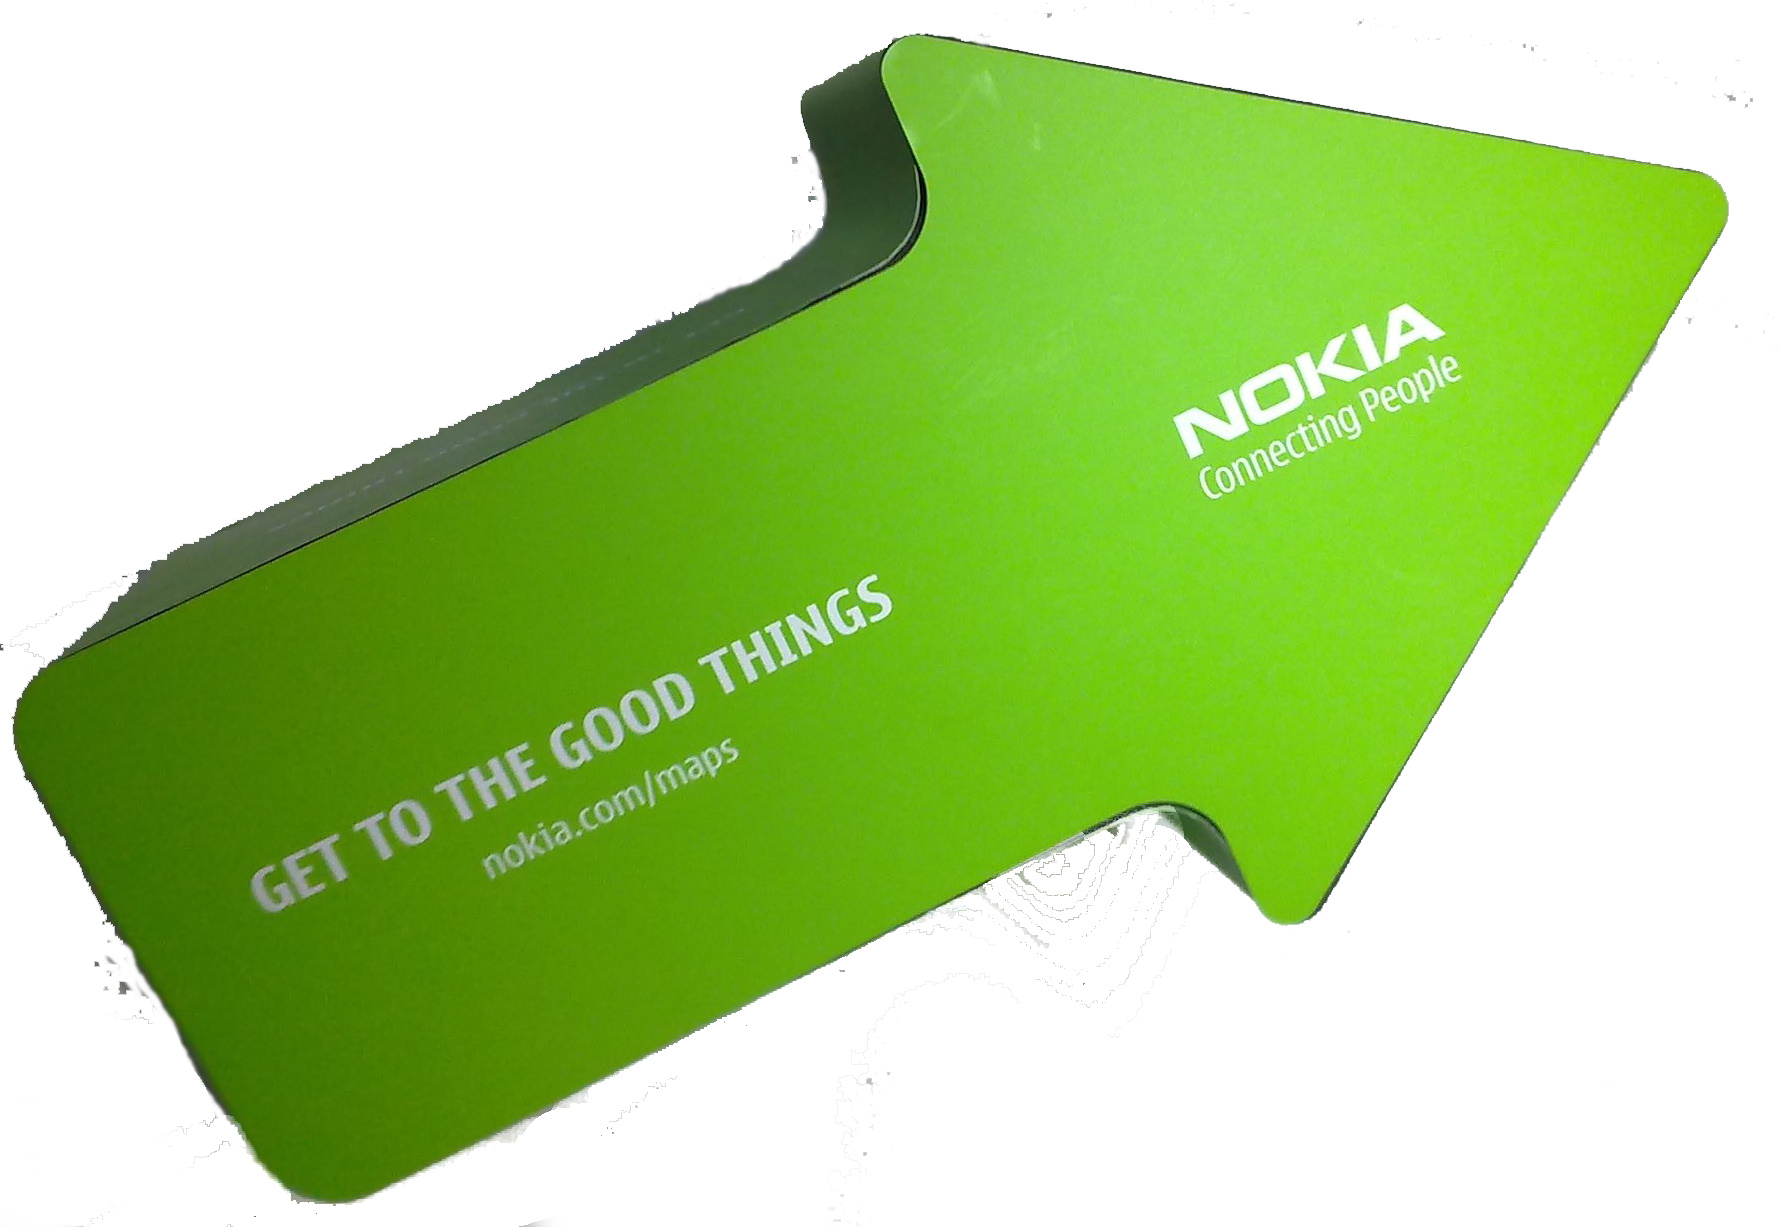 Nokia Event: Good Things starting today!